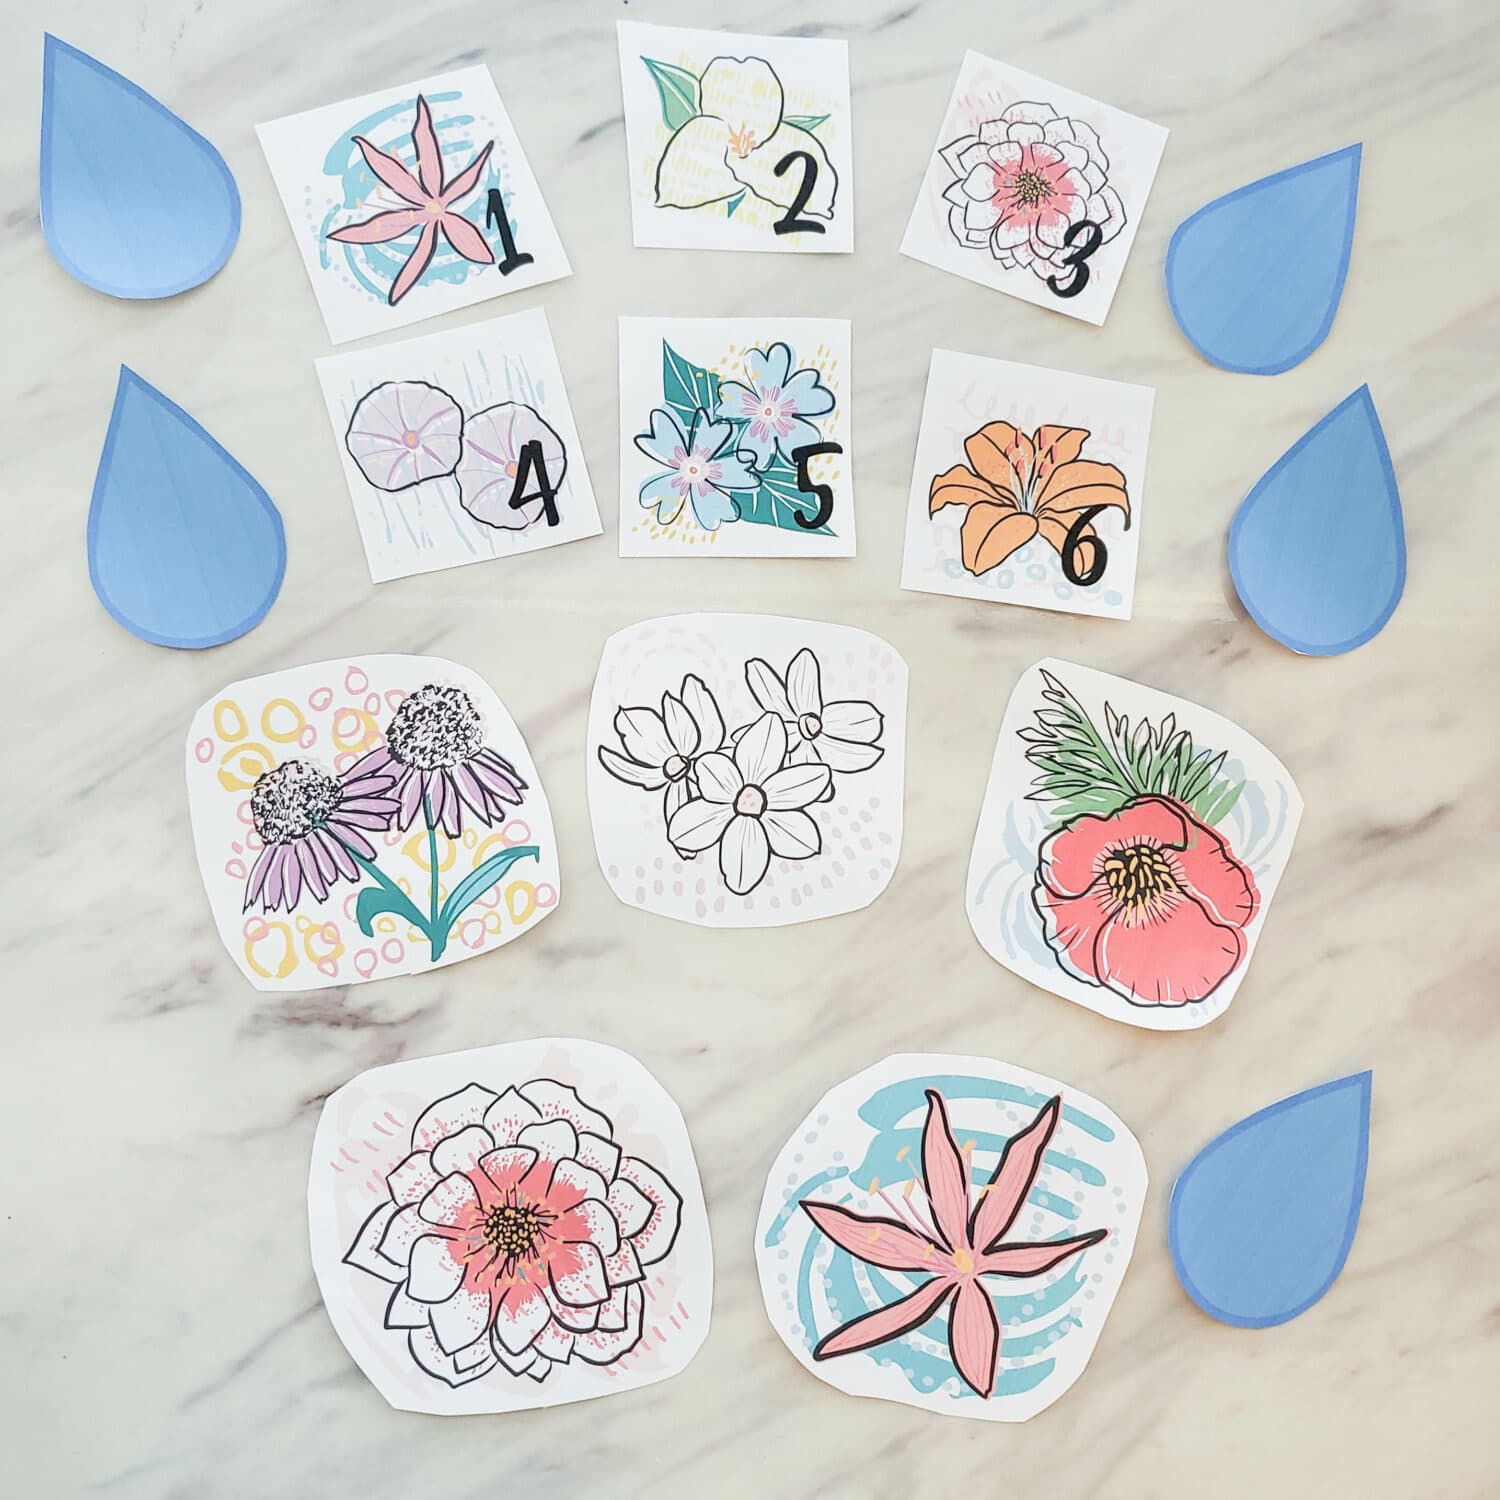 Give Said the Little Stream - spring blossoms and rain drops printable singing time song helps for LDS Primary music leaders